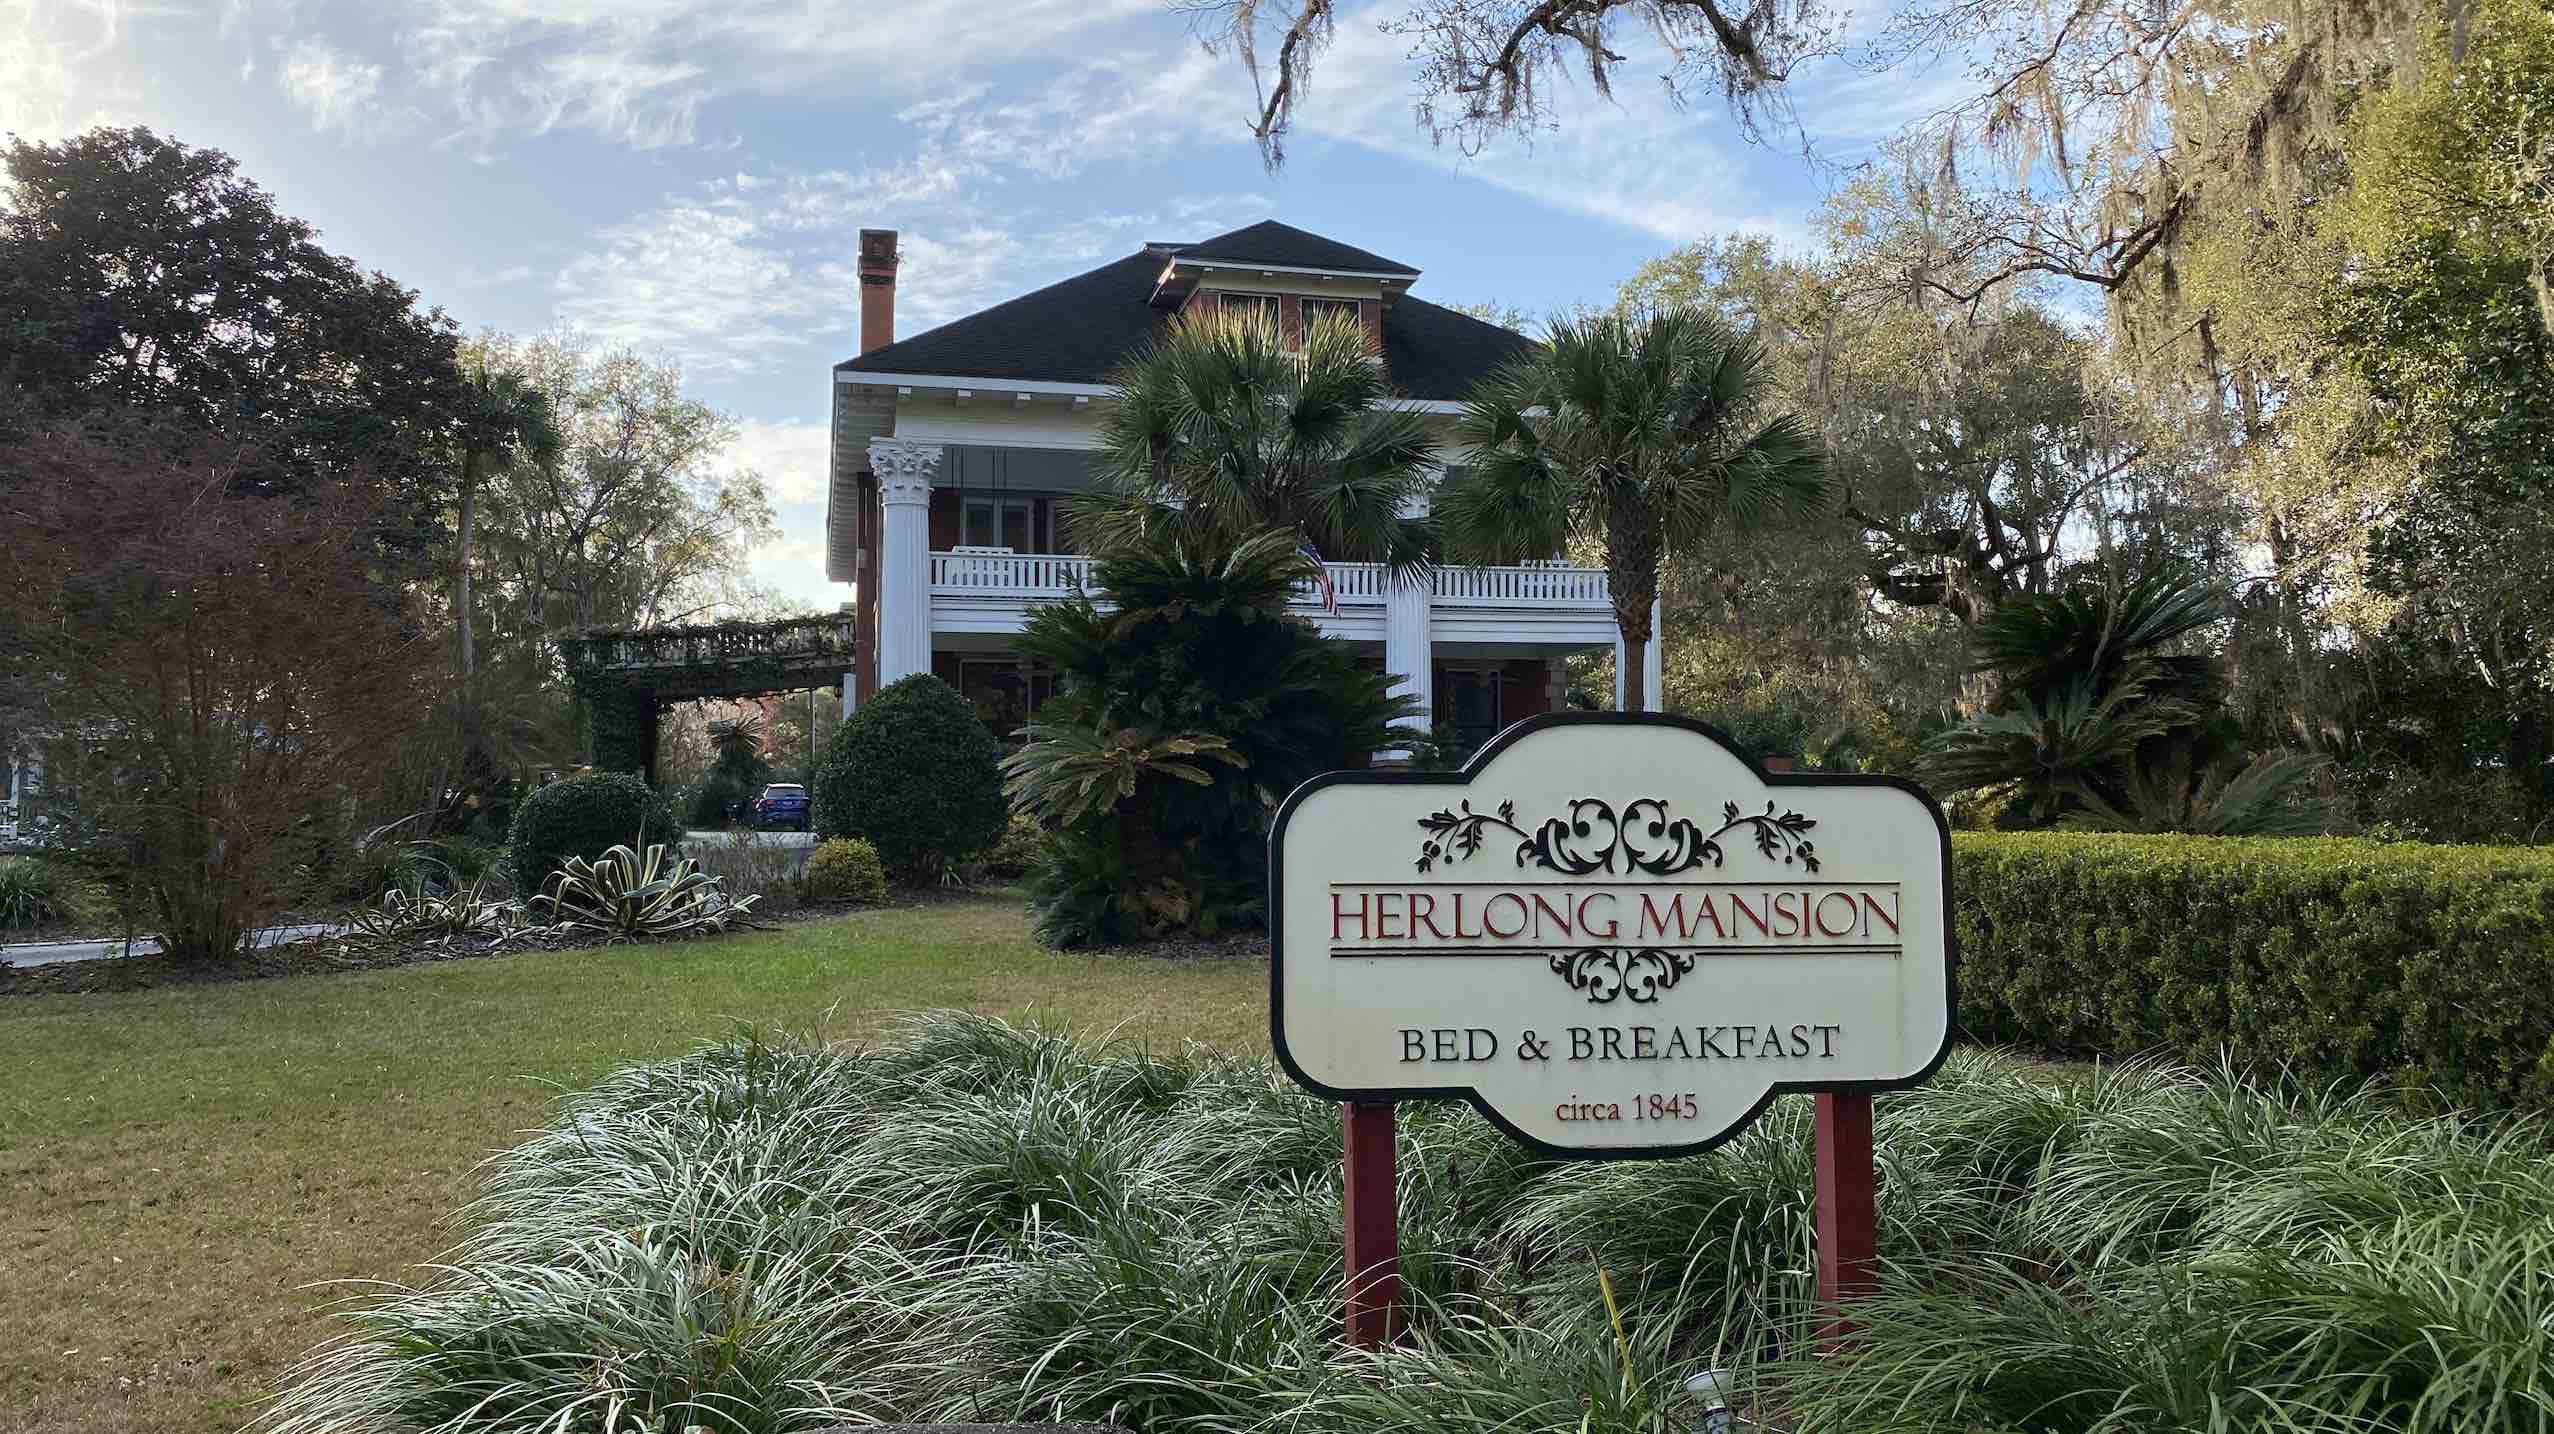 Herlong Mansion B&B offers luxurious accommodations in the heart of Micanopy. (Photo: Kim Kerr / Riley)